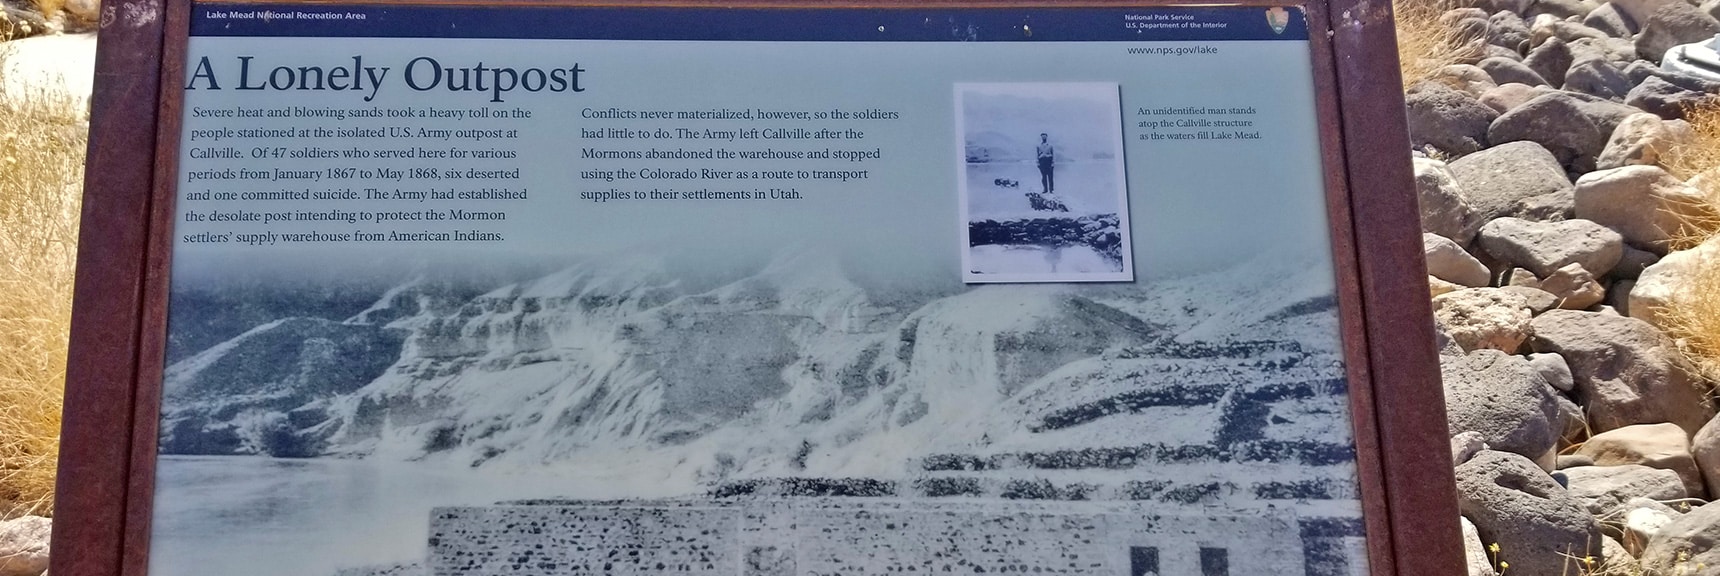 Interpretive Display of Military Outpost Beneath Lake Mead at Callville Bay | Callville Summit Trail | Lake Mead National Recreation Area, Nevada